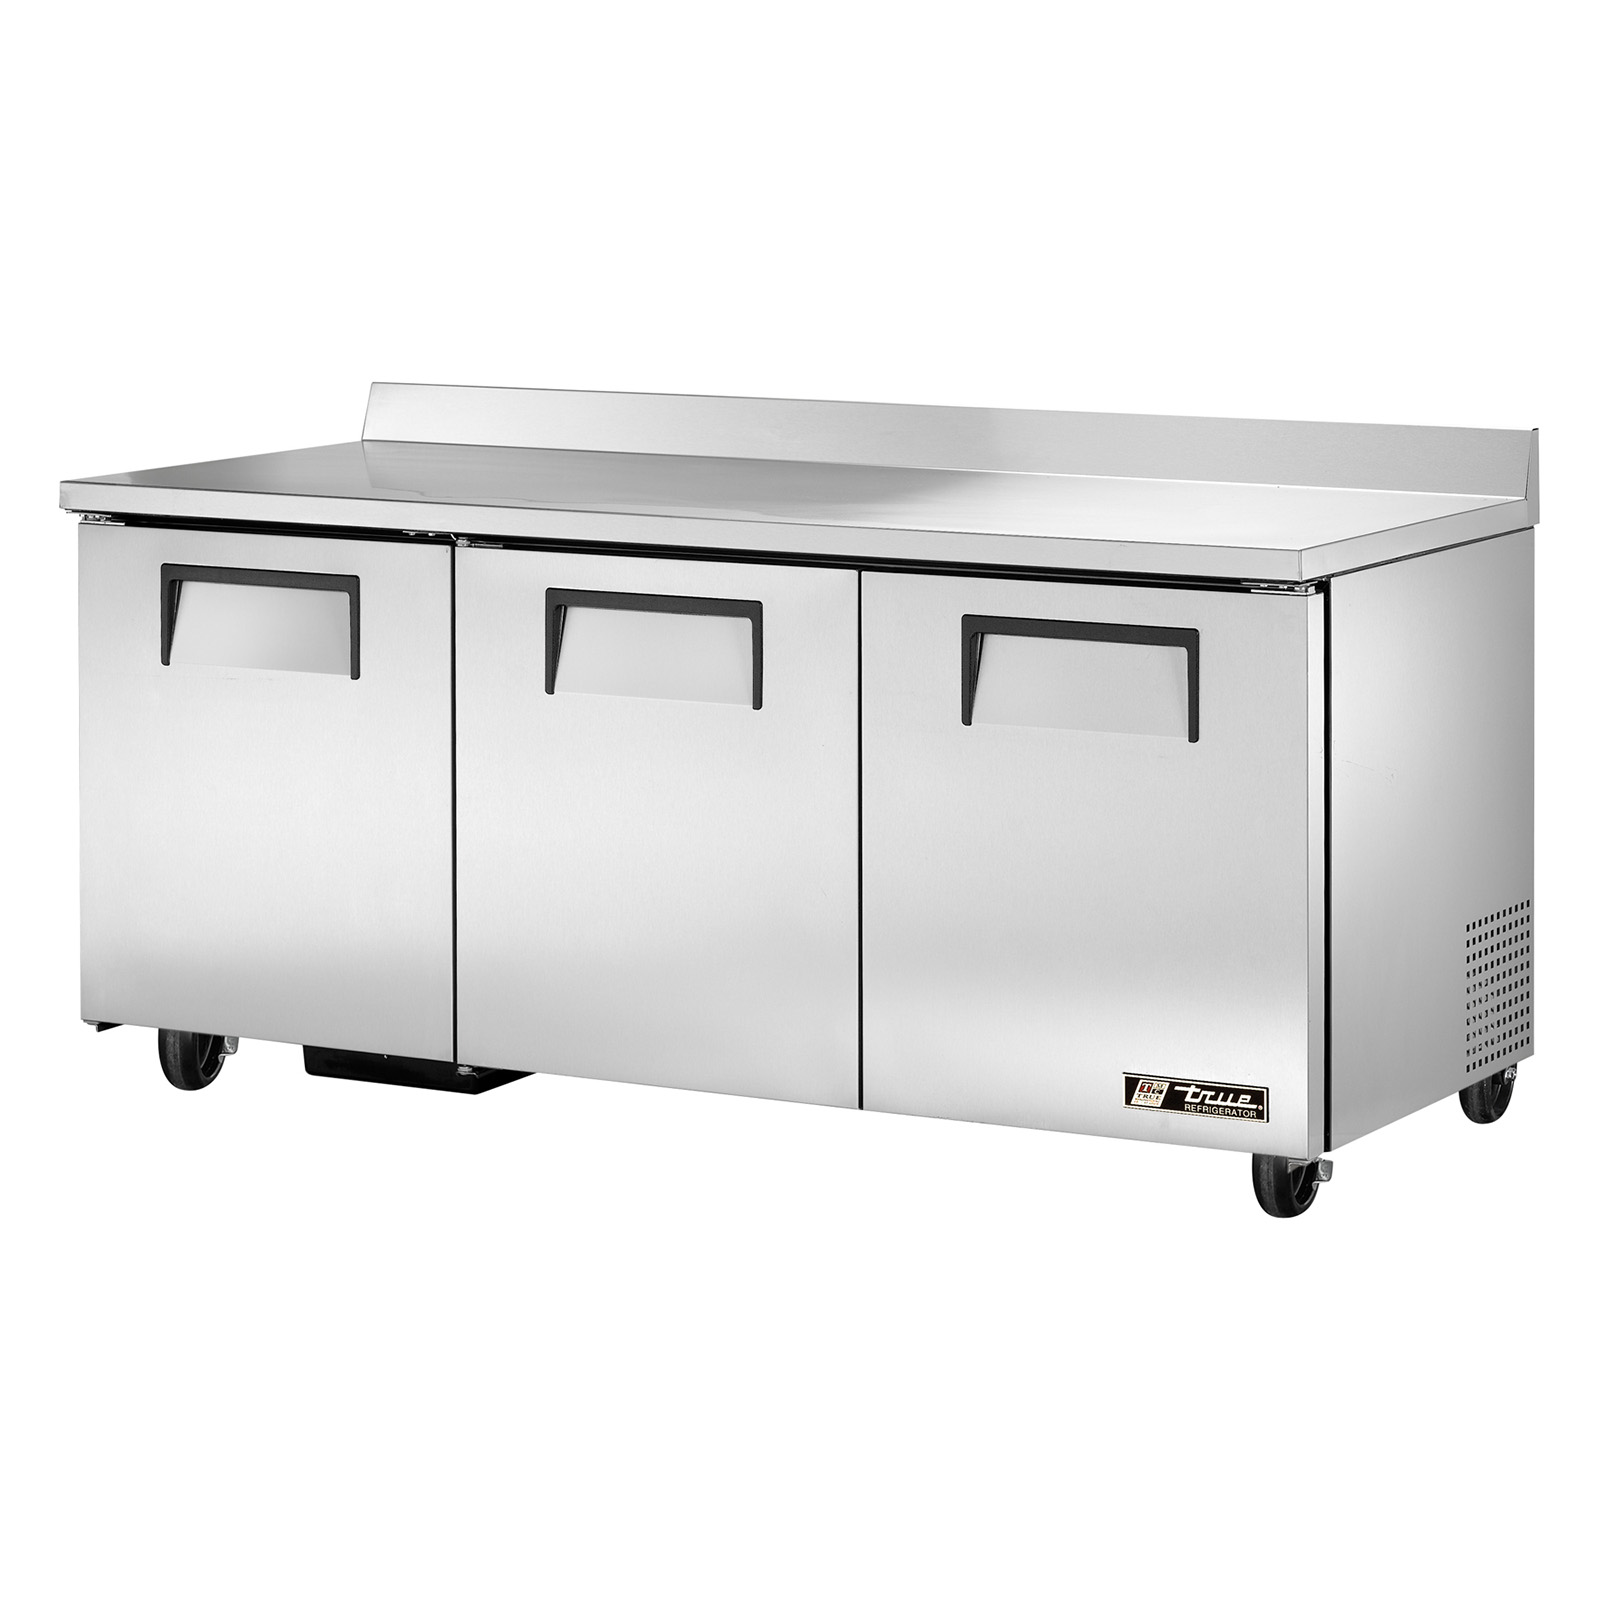 True Food Service Equipment TWT-72 Refrigerated Counter, Work Top